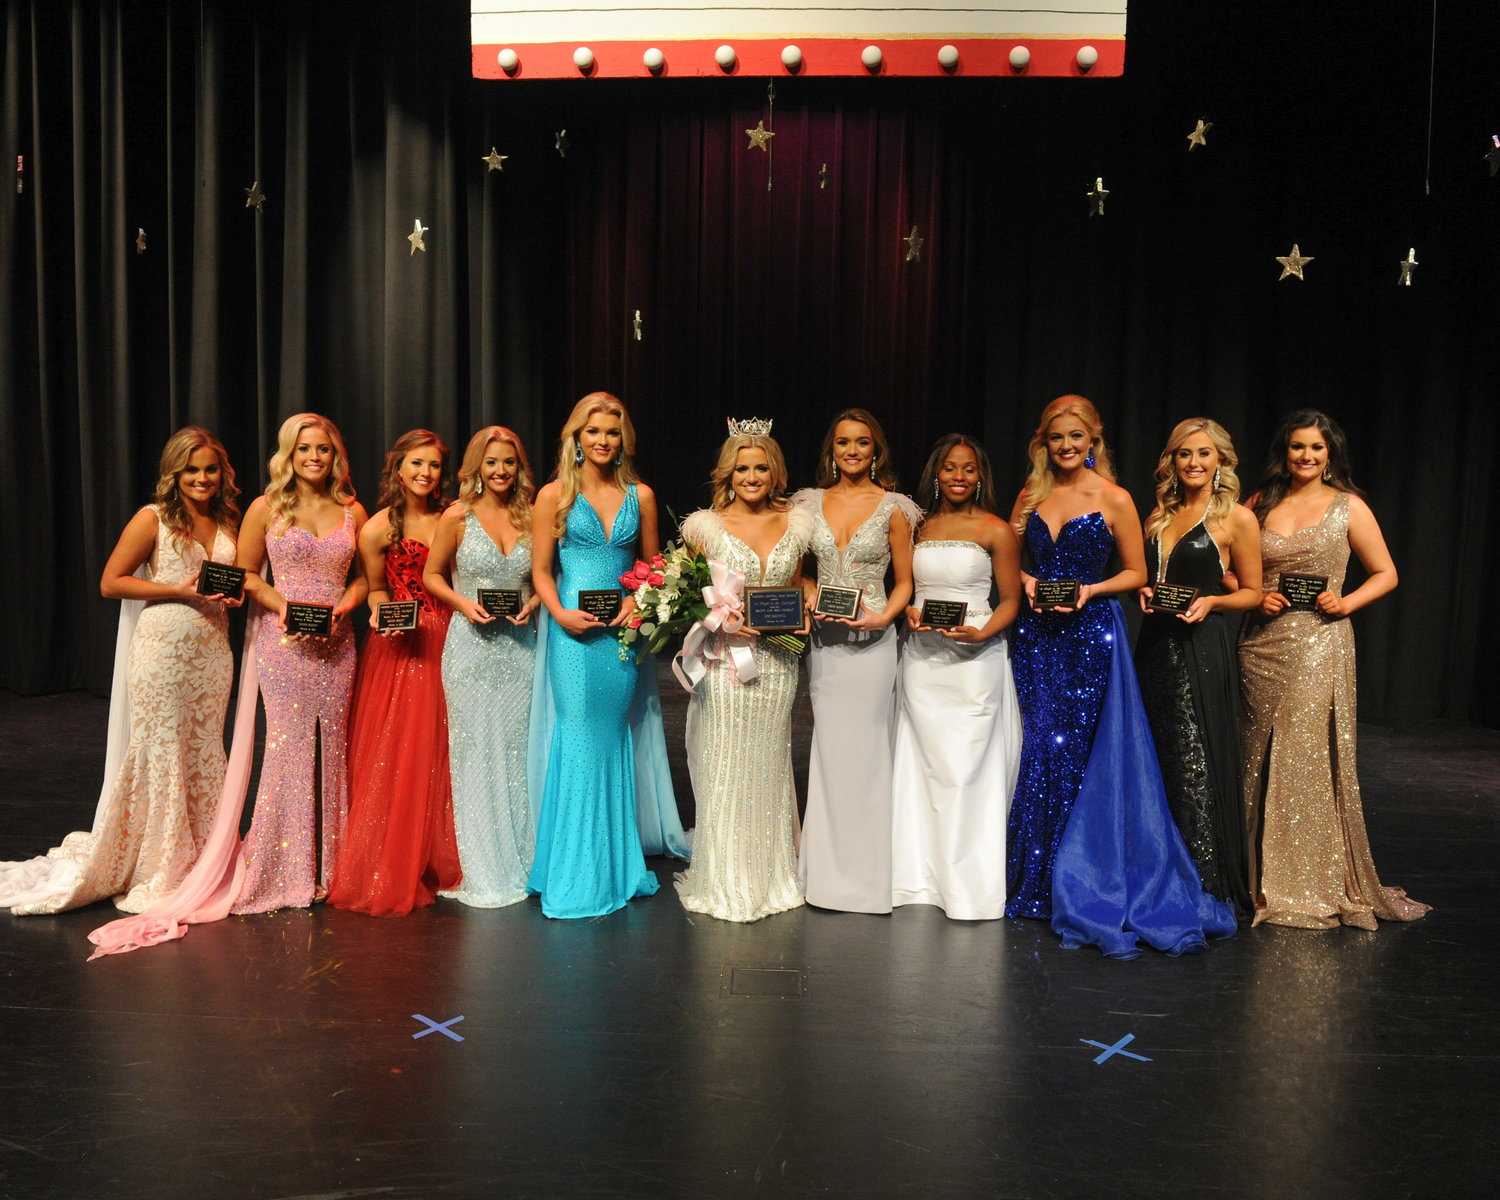 Madison Central High School hosted its annual Beauty and Beau pageant the week of February 8. Friday, February 12 was senior night. Pictured are the beauty winners. Left to right are beauties Grace McQuirter, Rossy Edmonson, Anna Kay Bumgarner, Ashley Erickson, Mary Boyd Parker, most beautiful Ellie Hetzel, beauties Taylor Boyt, Lana Evans, Ann Cabot Stockett, Avery Milligan and Adeline Walters.